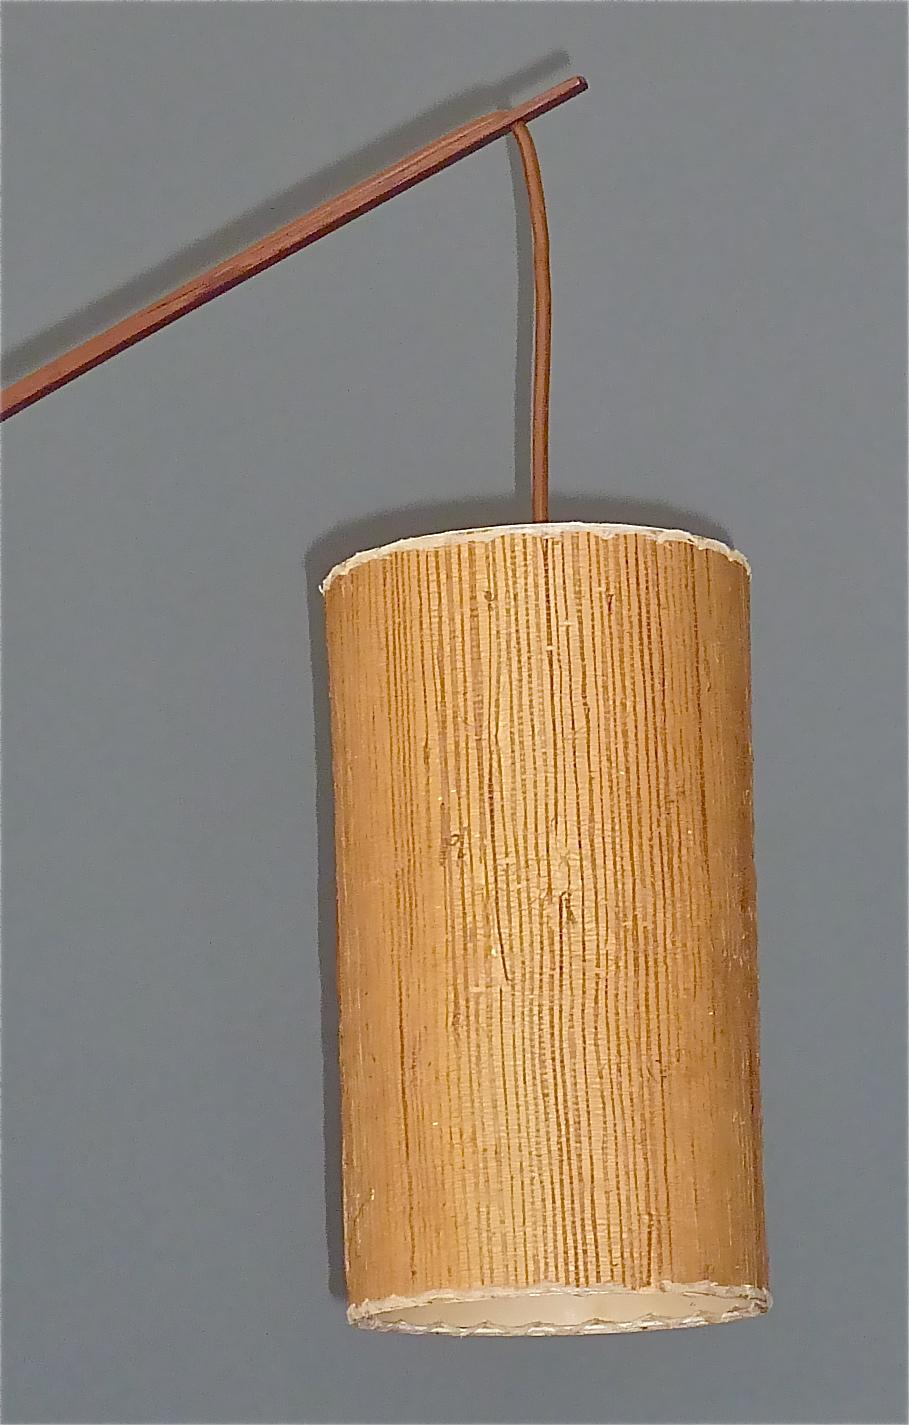 Monumental Teak Wall Lights Lamp by Rupprecht Skrip Coconut Counterweights 1950s For Sale 11